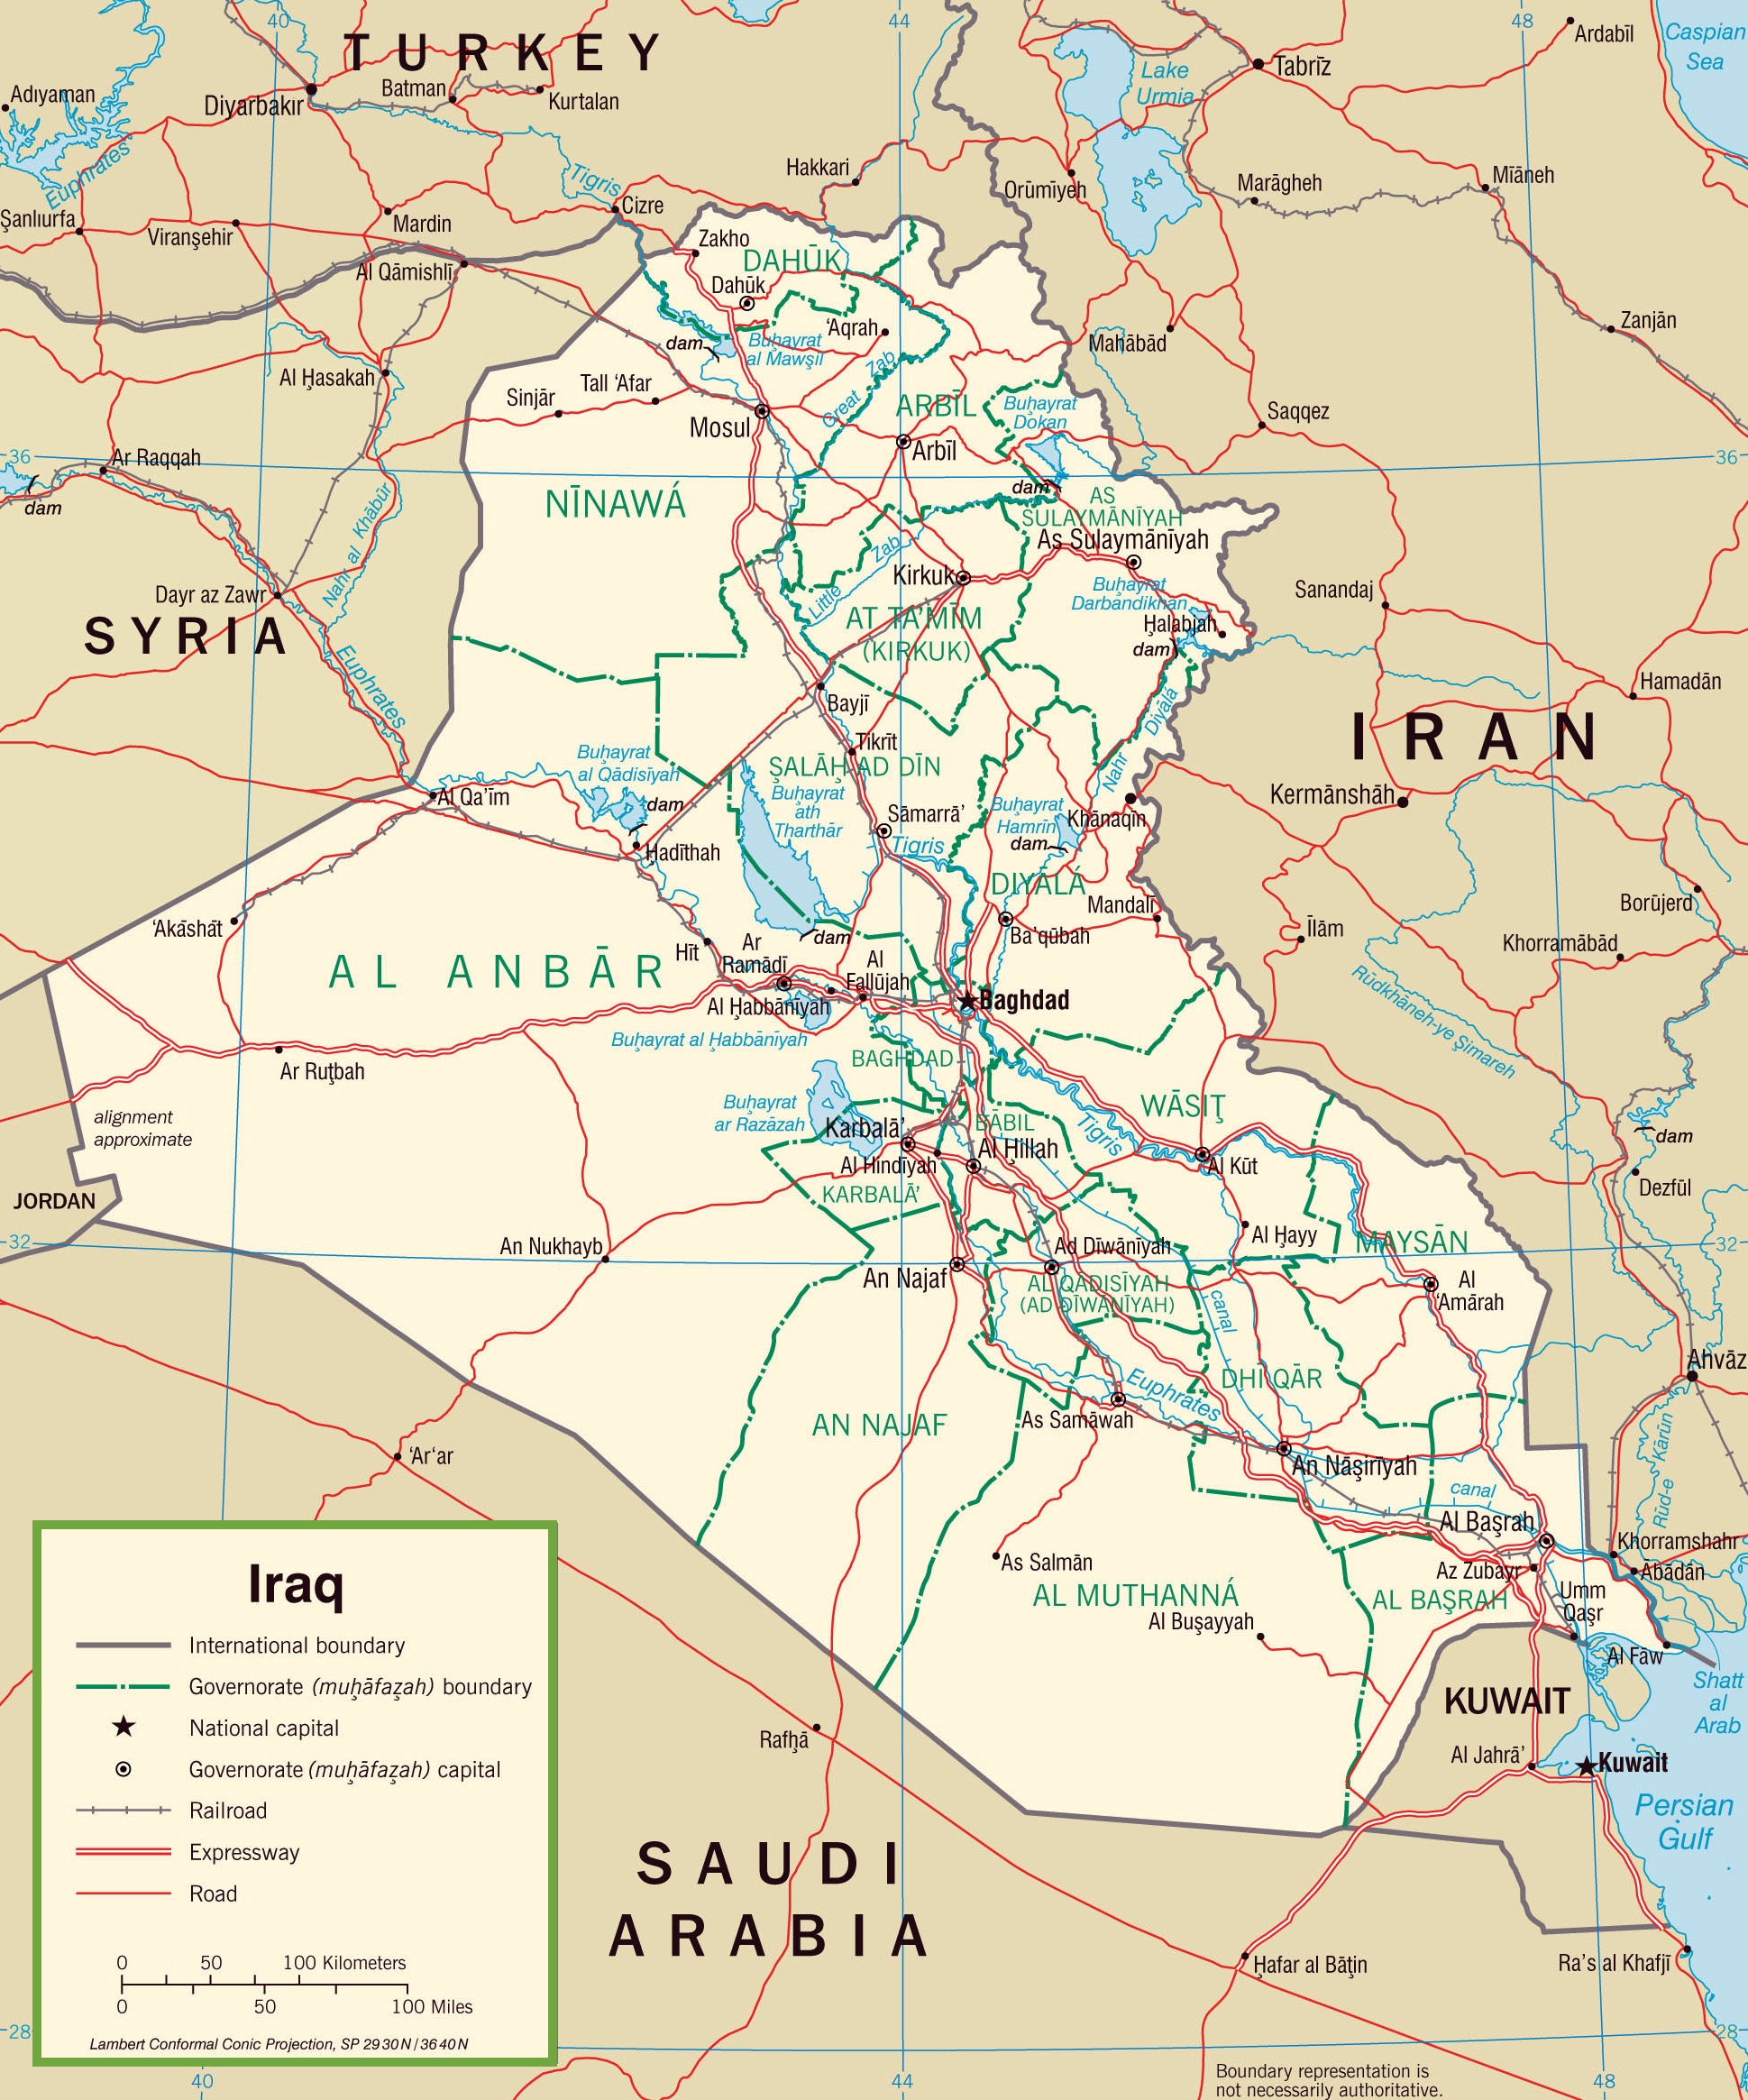 Albums 101+ Wallpaper Map Of Iran And Iraq And Surrounding Countries ...